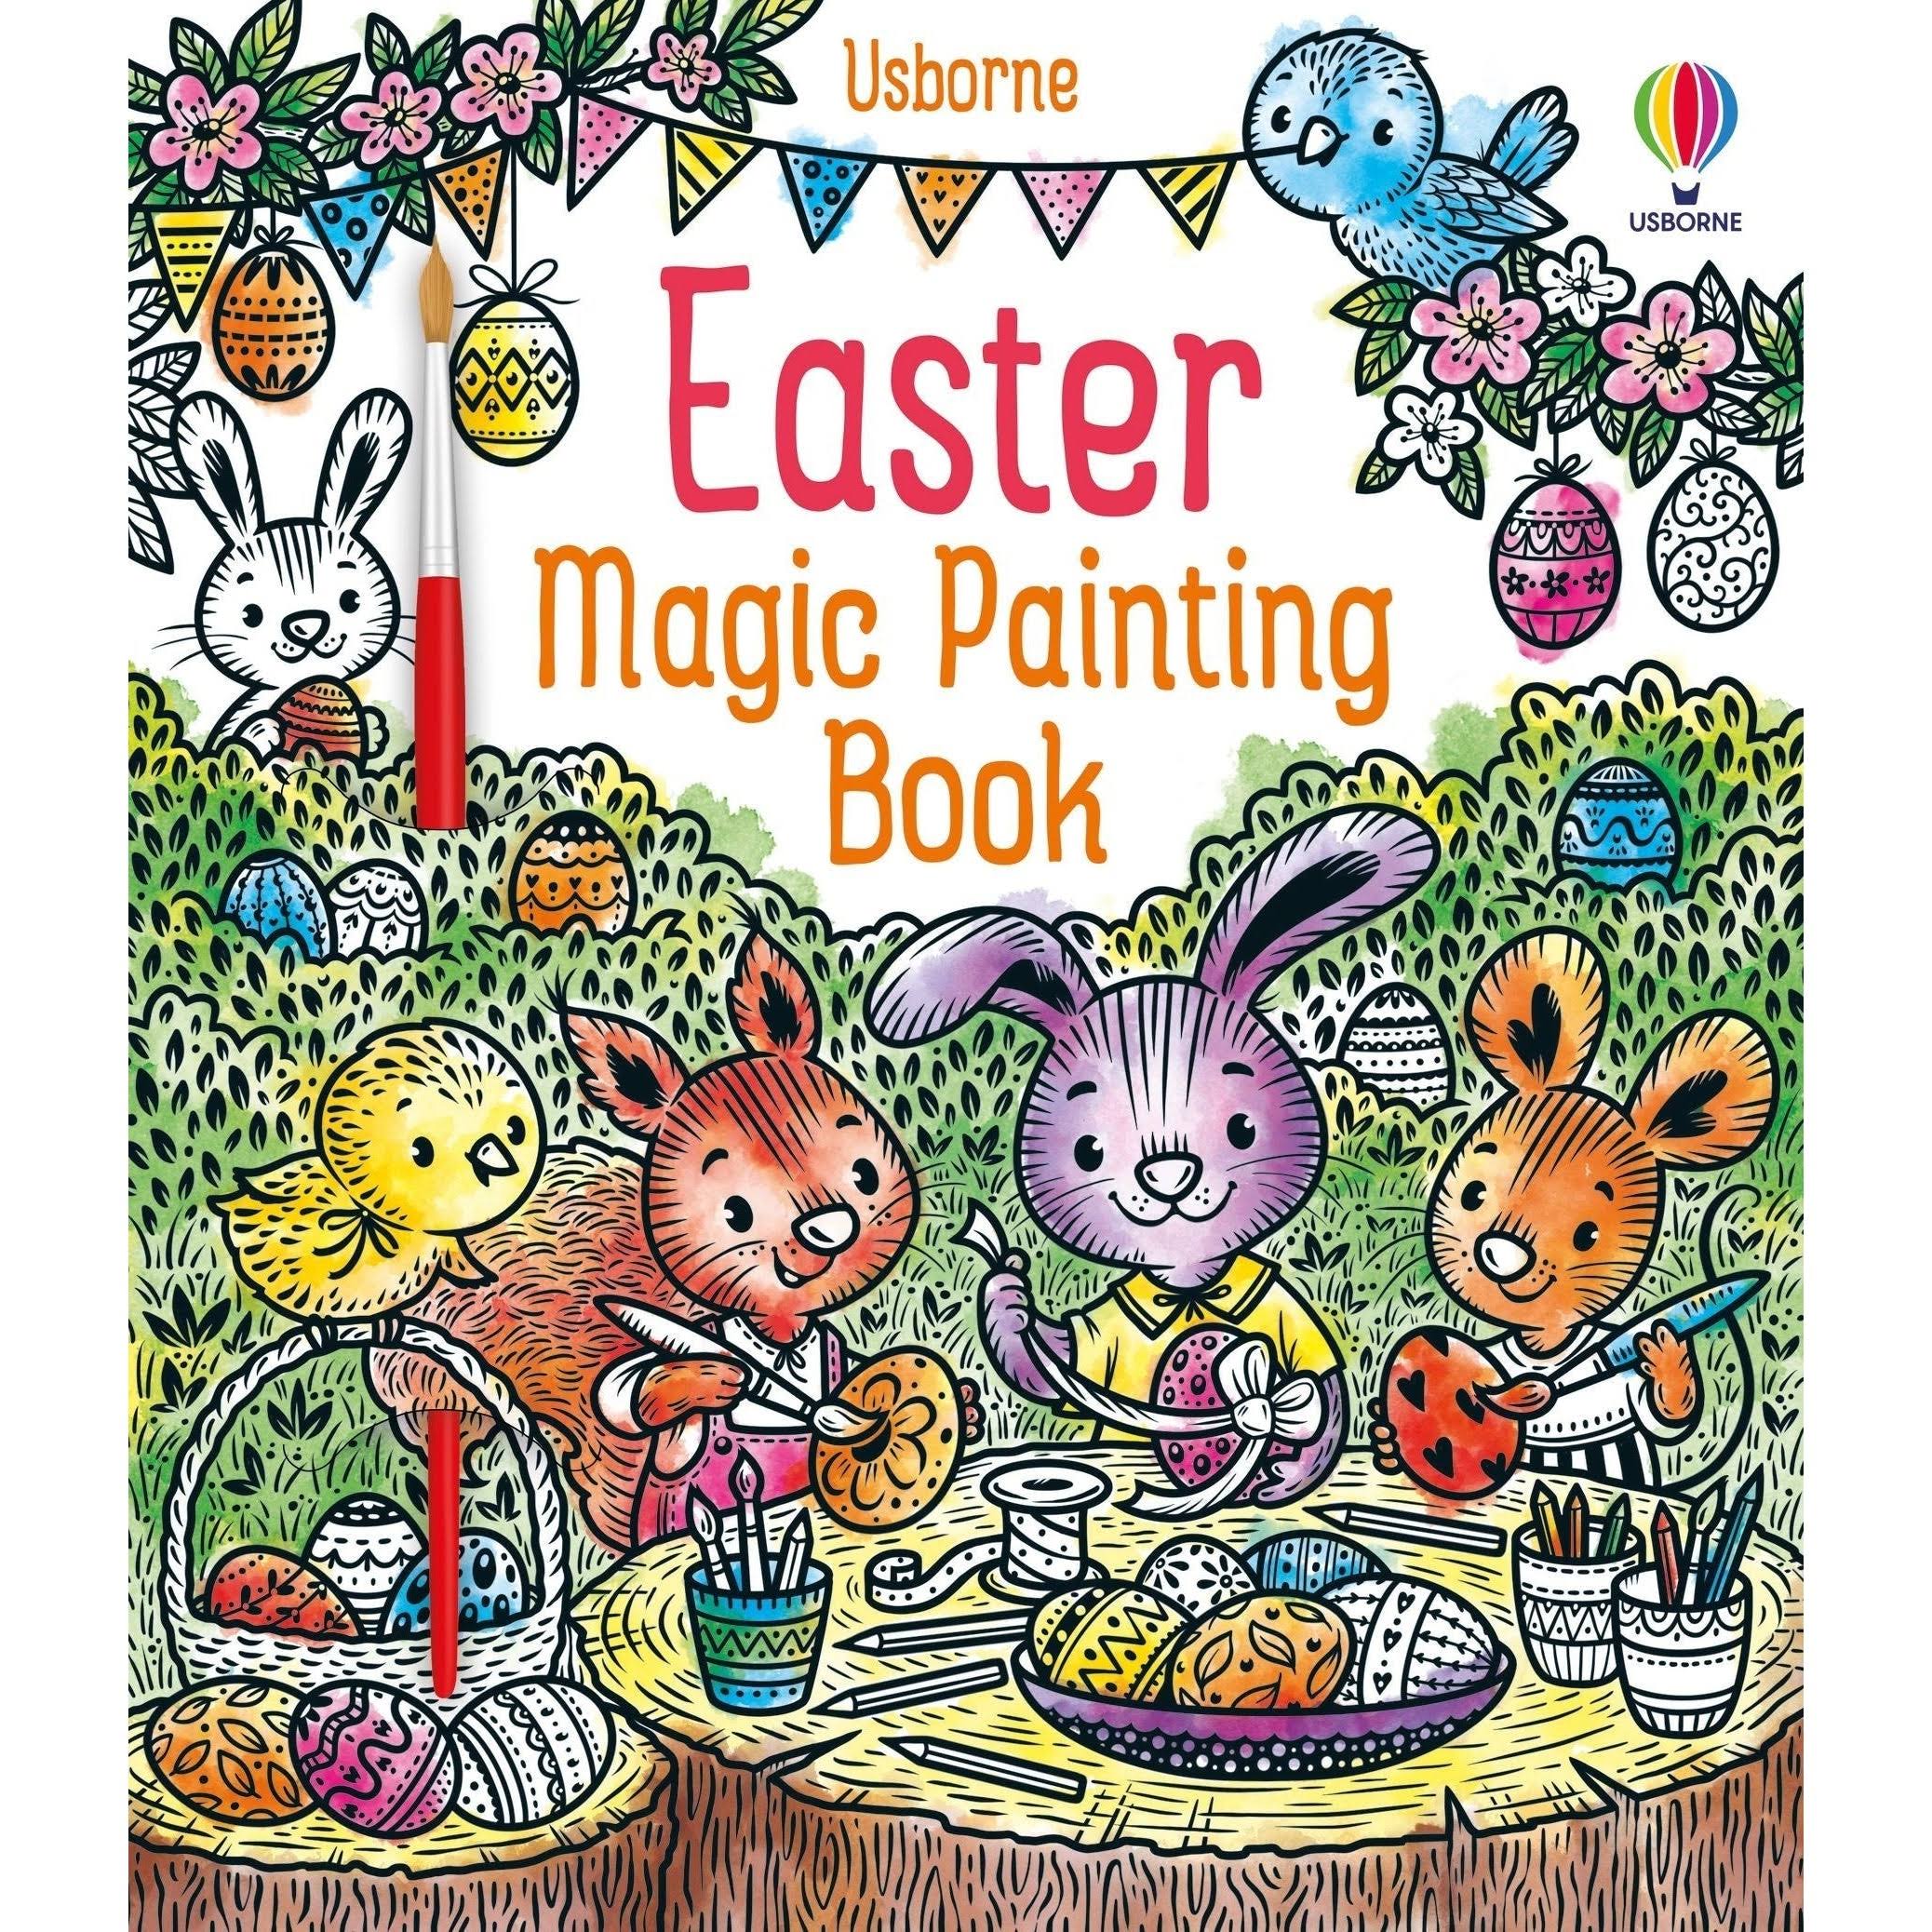 Easter Magic Painting Book [Book]